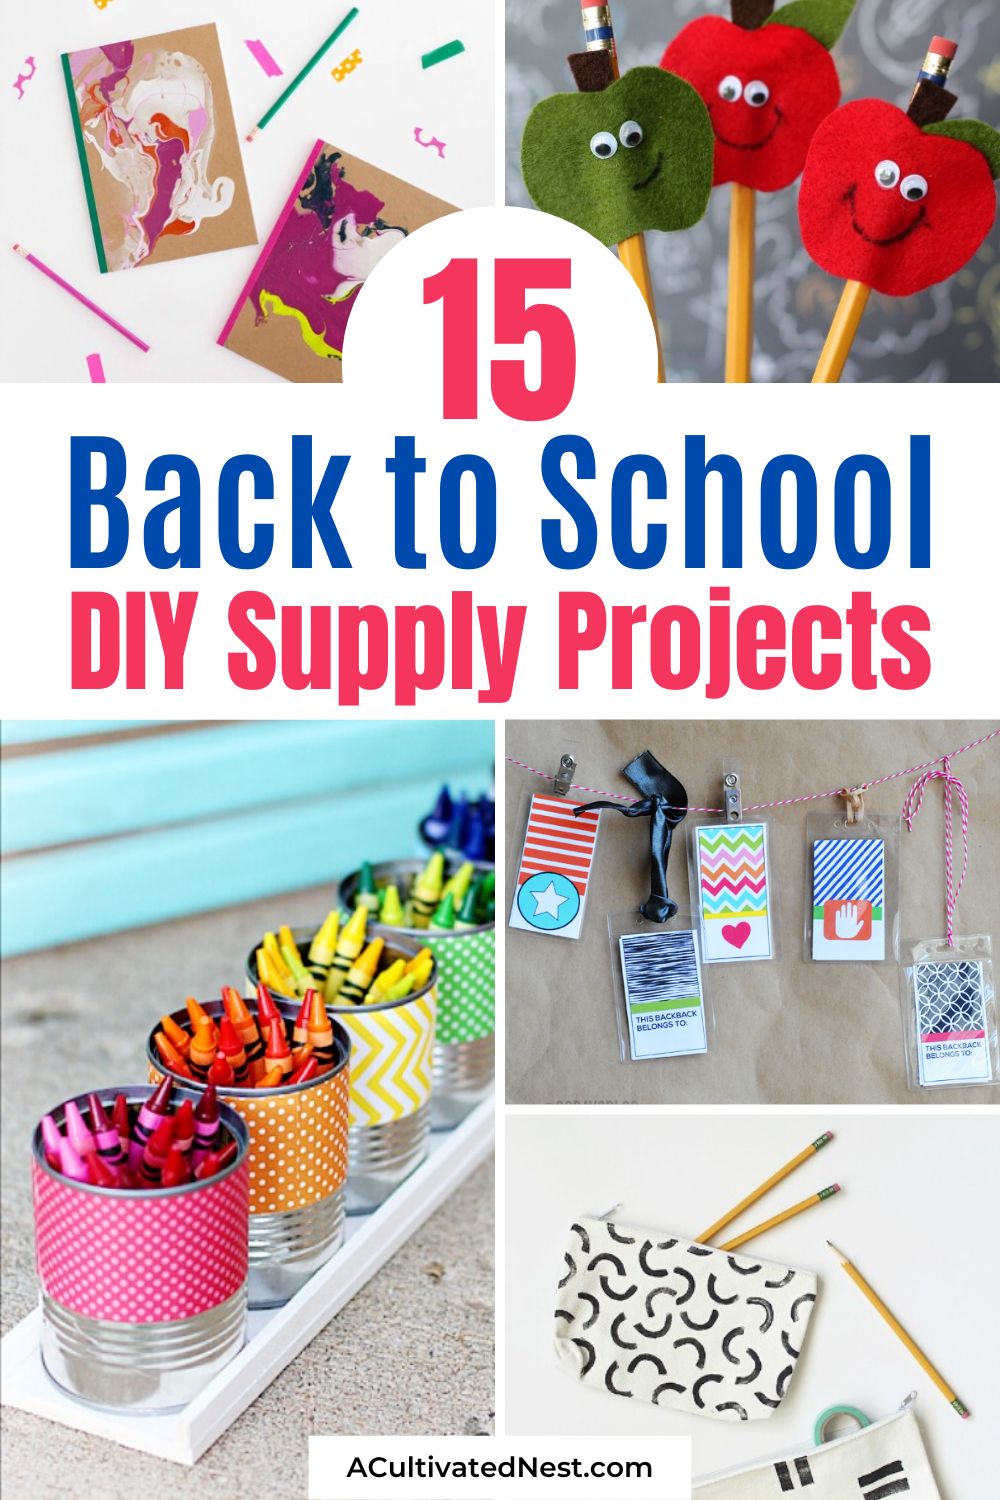 15 DIY School Supply Projects You Need To Make - Make back to school time even more special by trying some of these fun DIY school supply projects! | Back to school, DIY, school supply projects, pencil toppers, backpacks, diy note book covers, diy pencil case, back to school organization, school supply crafts #backtoschool #diyProjects #schoolCrafts #schoolSupplies #ACultivatedNest